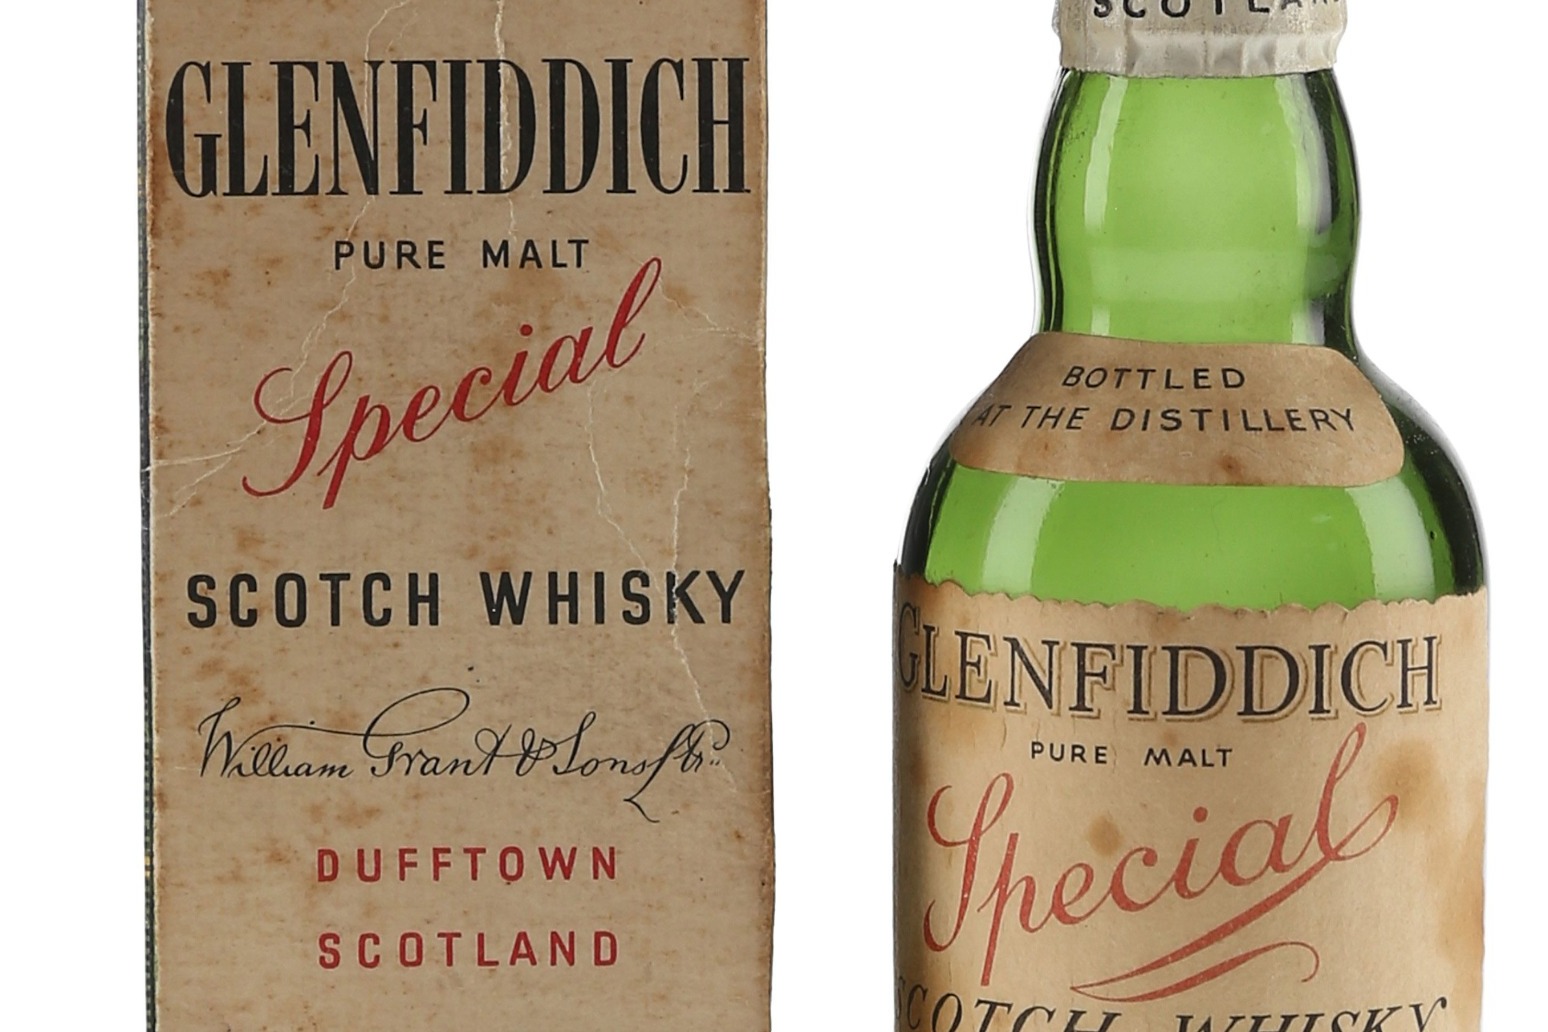 Whisky miniature fetches £6,440 at auction 